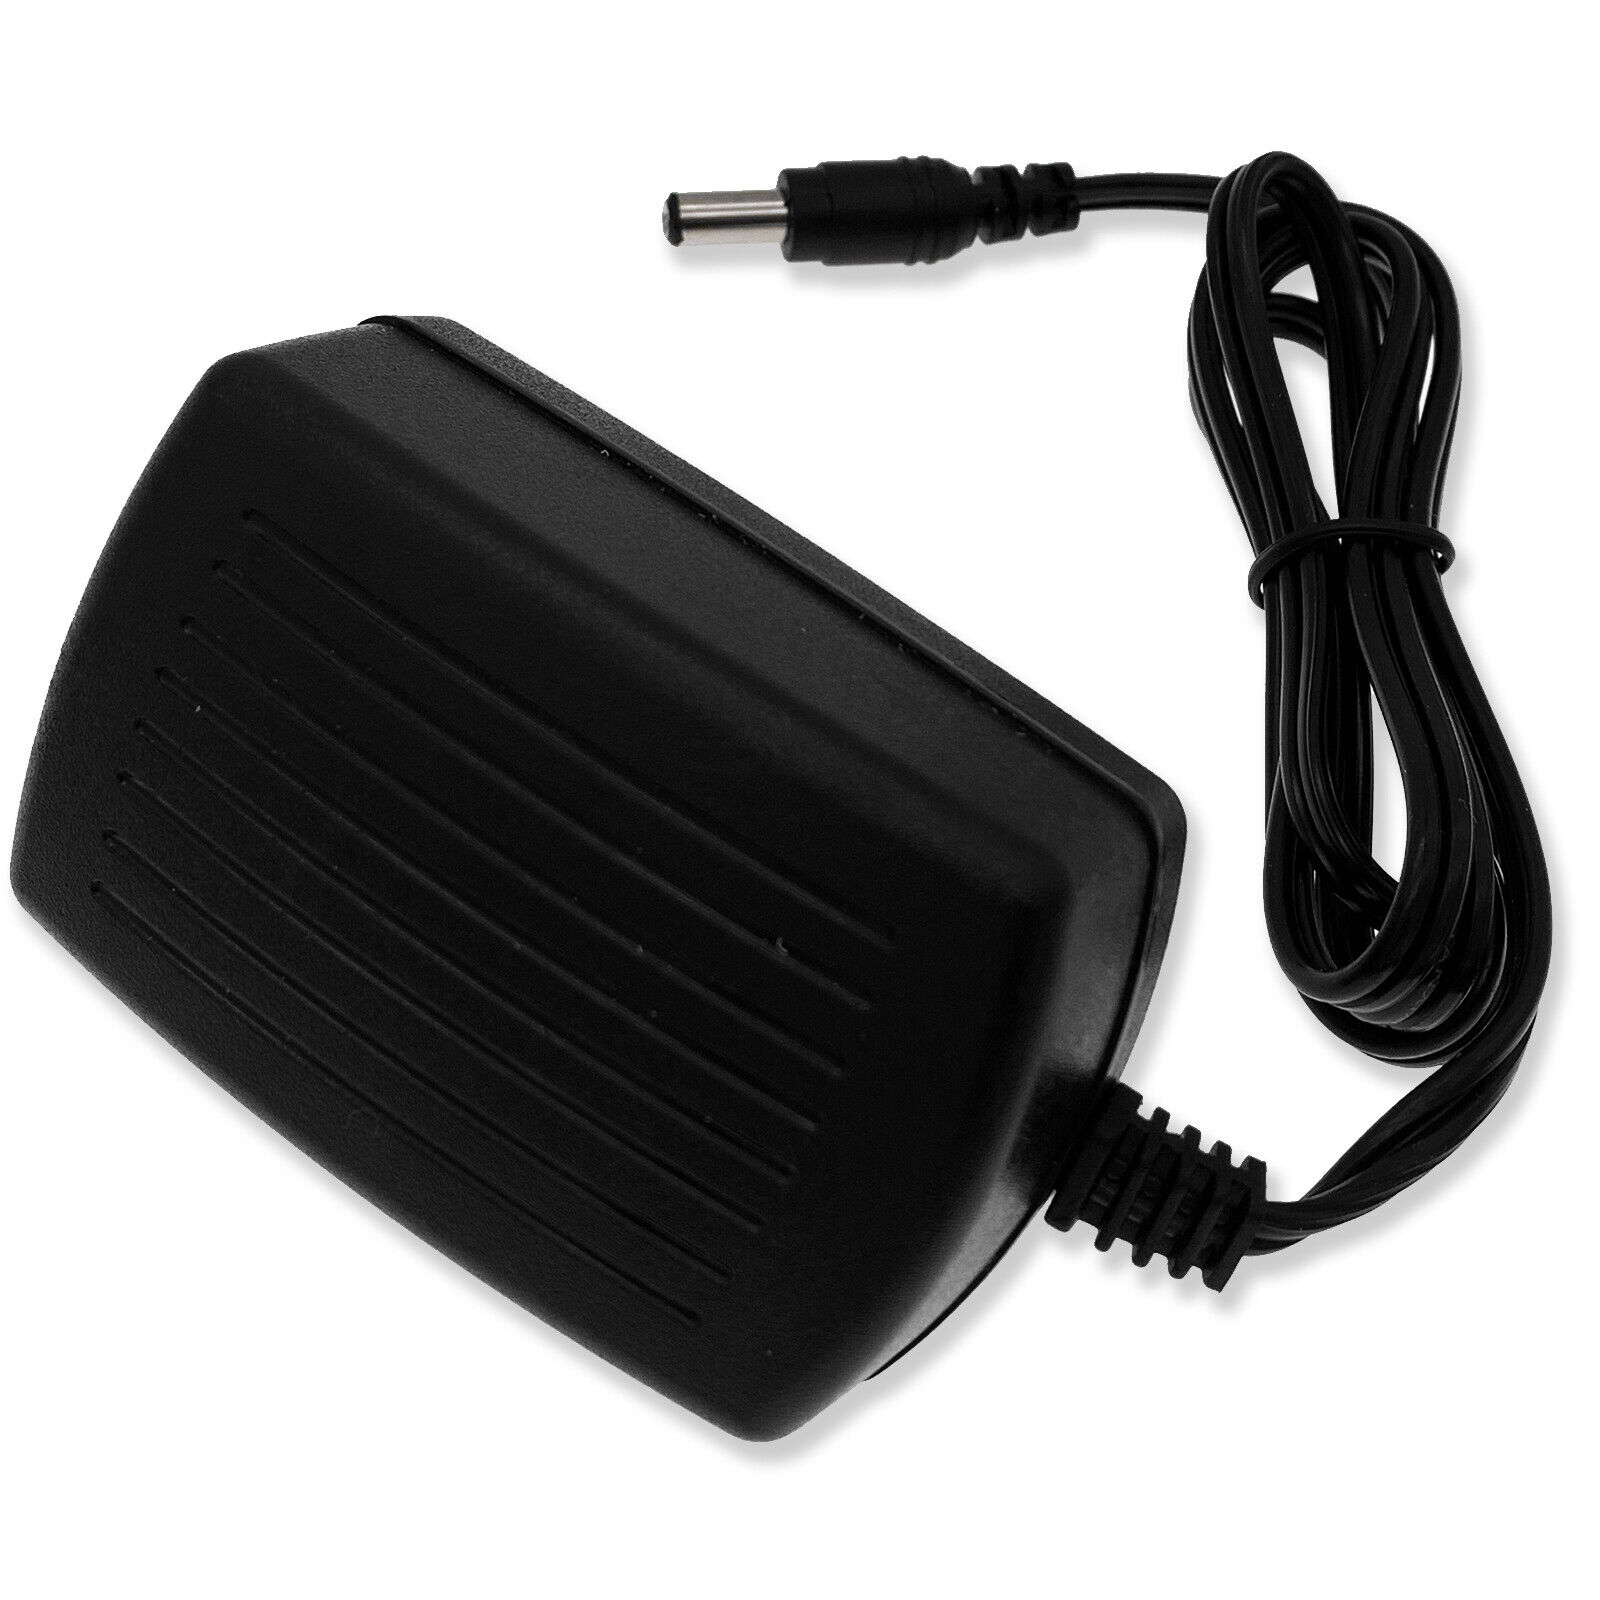 AC Adapter Power Supply for Suzuki QChord QC-1 Q-Chord QC1 Digital Songcard Synthesizer Guitar Power Supply Cord Cable